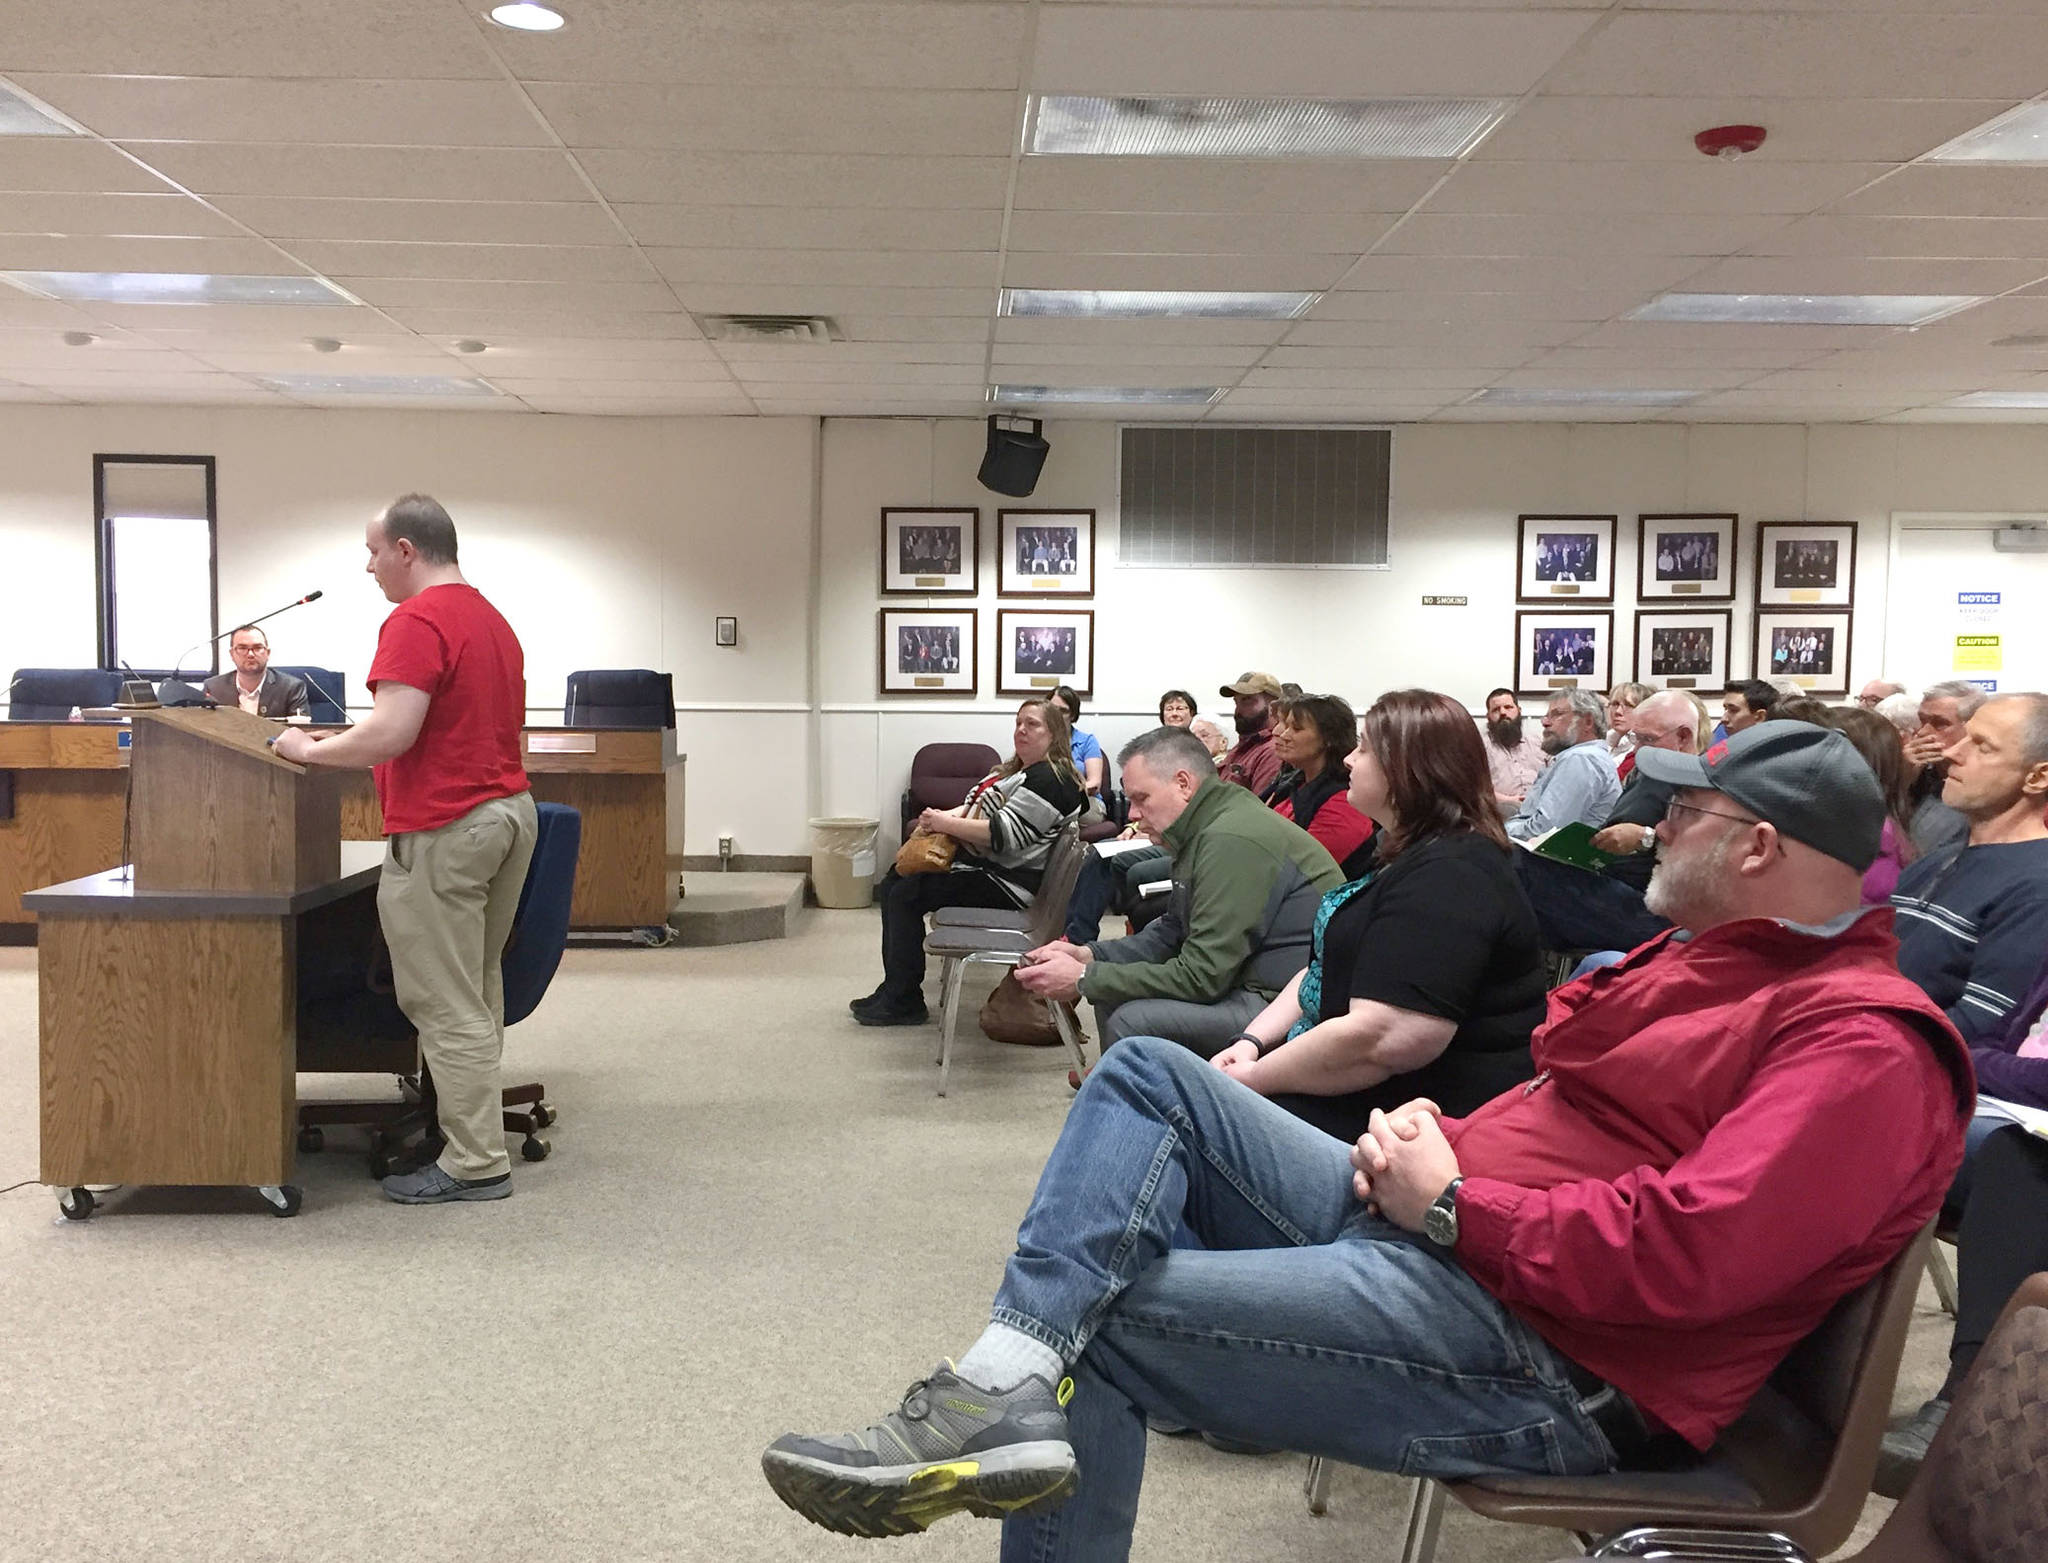 Kindergarten teacher Daniel Bowen (at podium) speaks to the Kenai Peninsula Borough Assembly in favor of full funding for the Kenai Peninsula Borough School District at the assembly’s meeting on Tuesday, April 3, 2018 in Soldotna, Alaska. About 40 people attended the meeting Tuesday, many wearing red, to show their support for public education funding. (Photo by Elizabeth Earl/Peninsula Clarion)